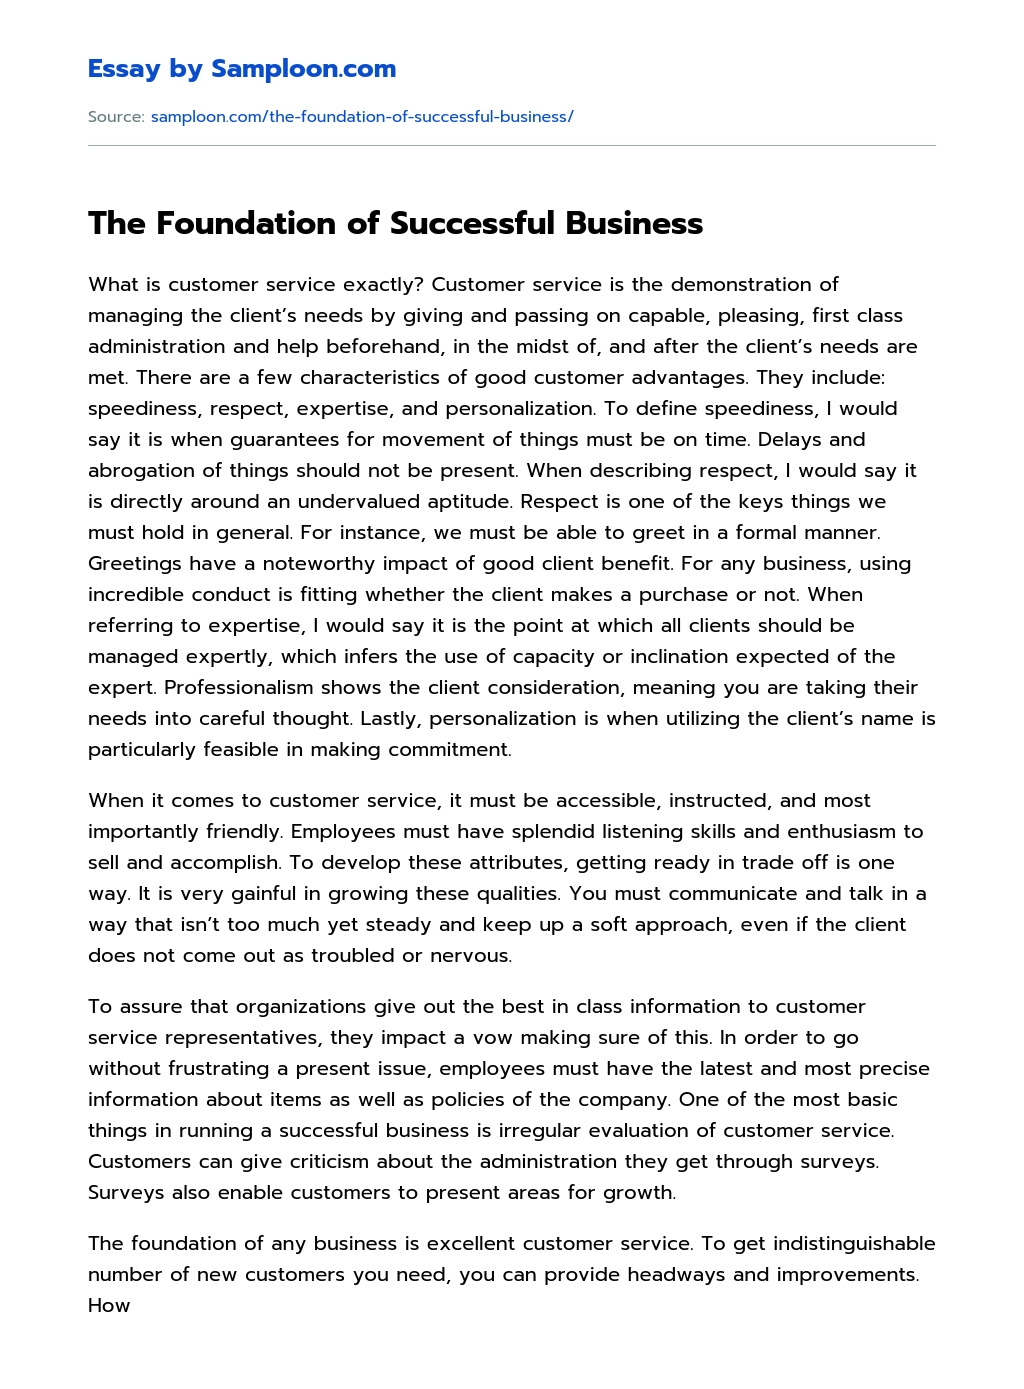 The Foundation of Successful Business essay